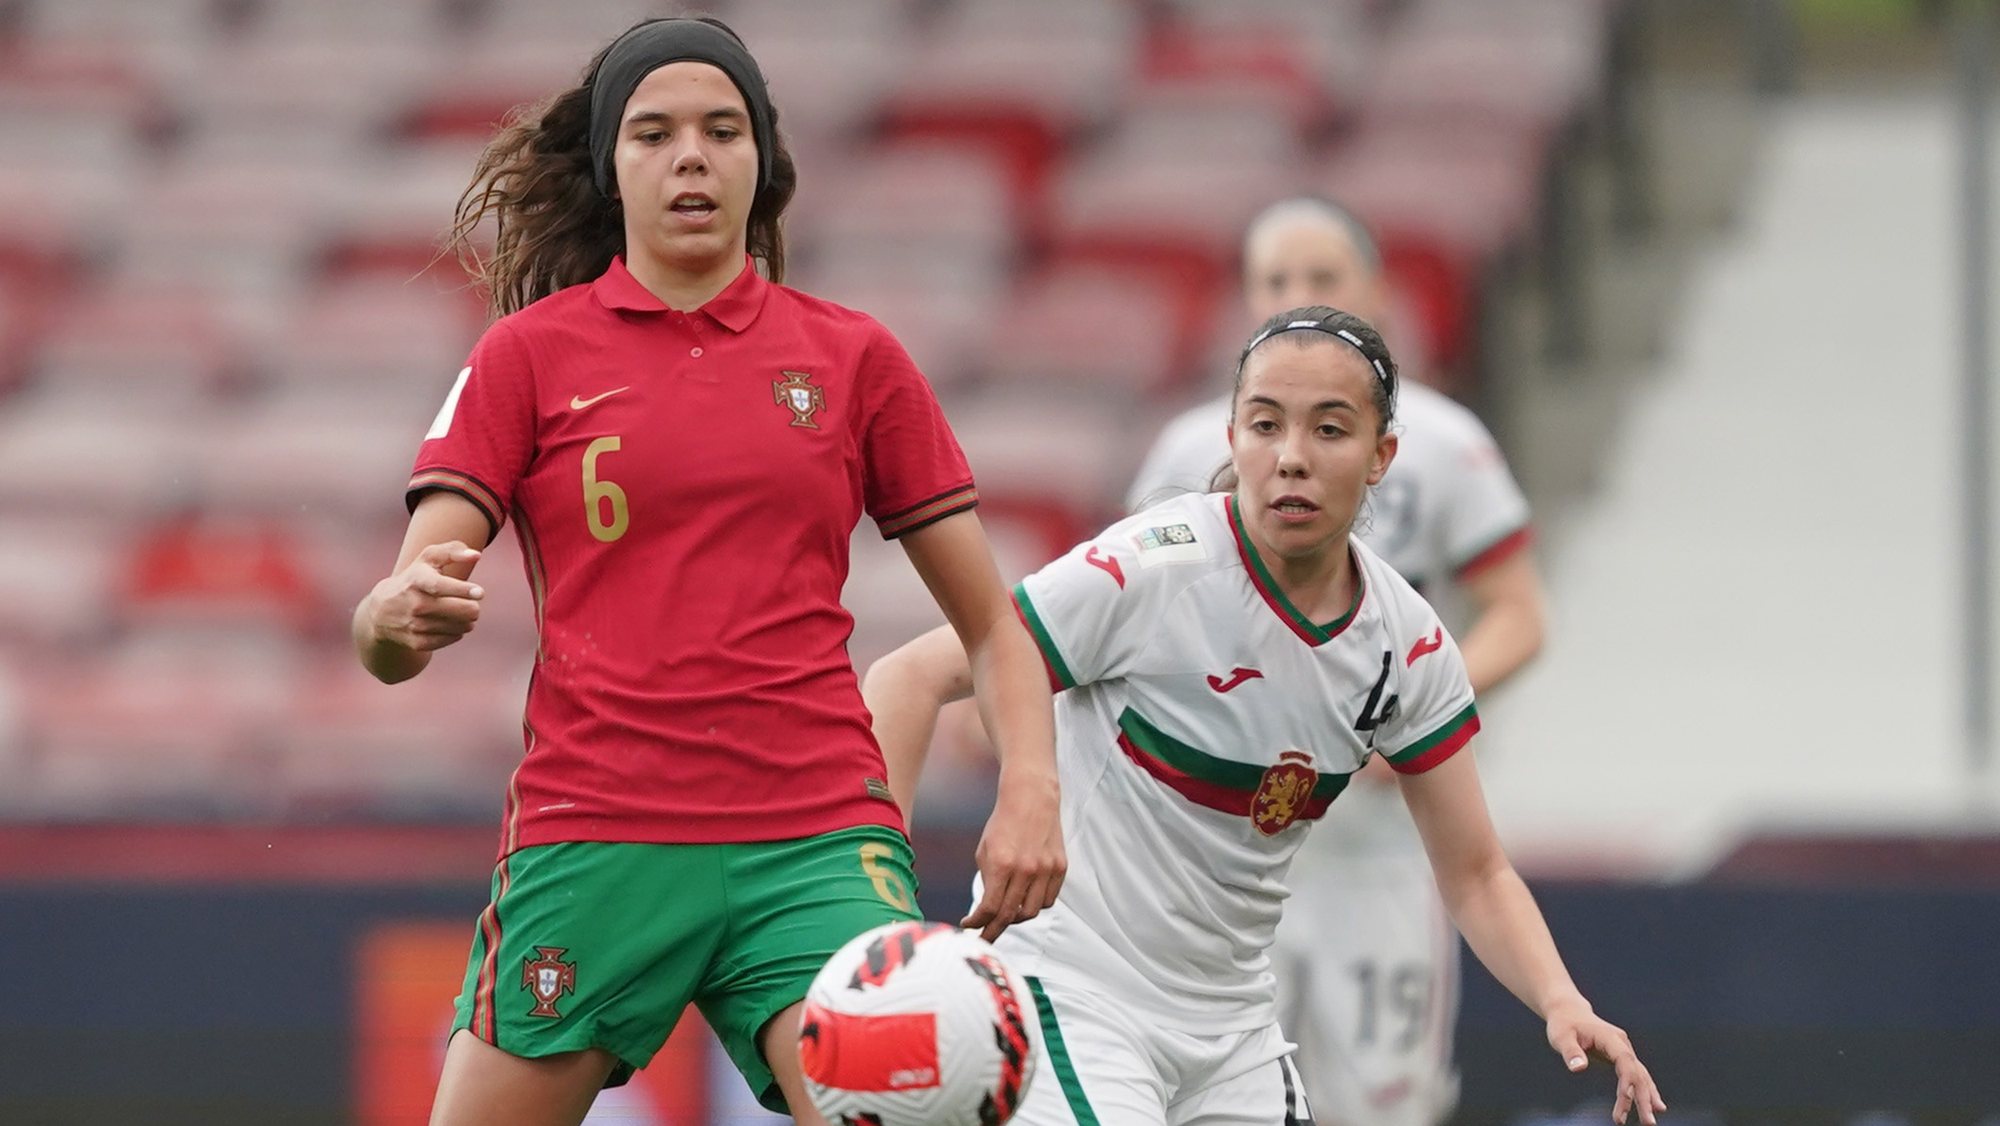 Portugal’s Andreia Jacinto (L) fights for the ball with Bulgaria`s Naydenova during the FIFA Women&#039;s Soccer World Cup qualification match held in Barcelos, Portugal, 12 April 2022. HUGO DELGADO/LUSA